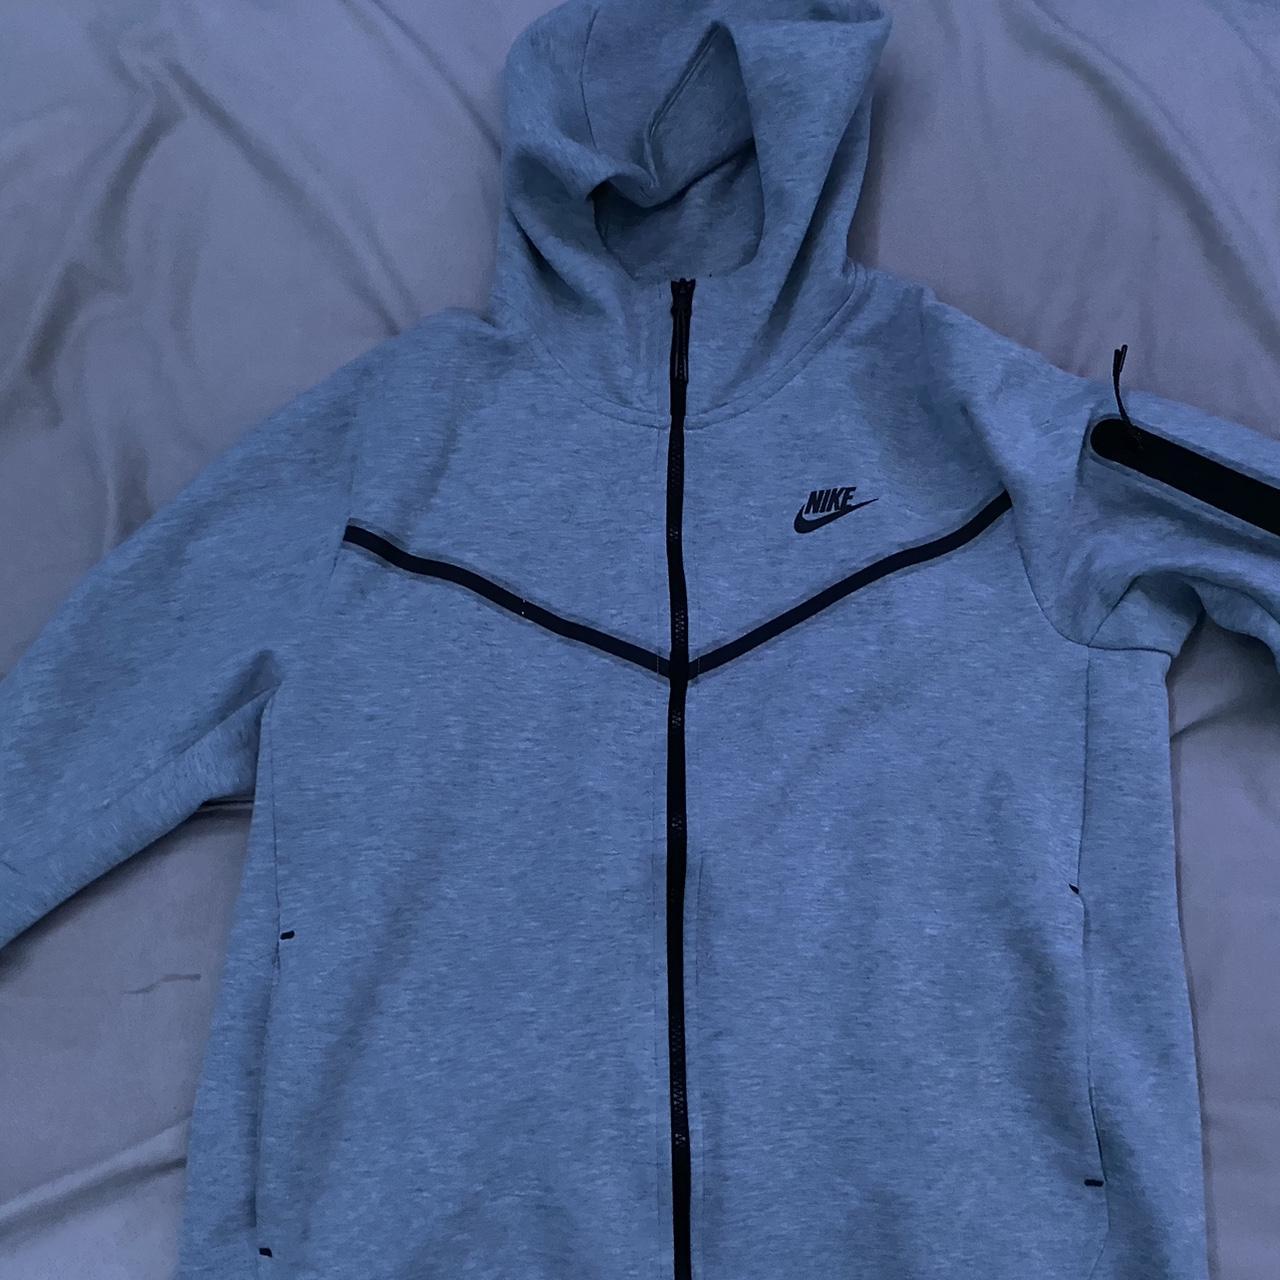 GREY NIKE TECH MENS LARGE GREAT CONDITION #nike... - Depop